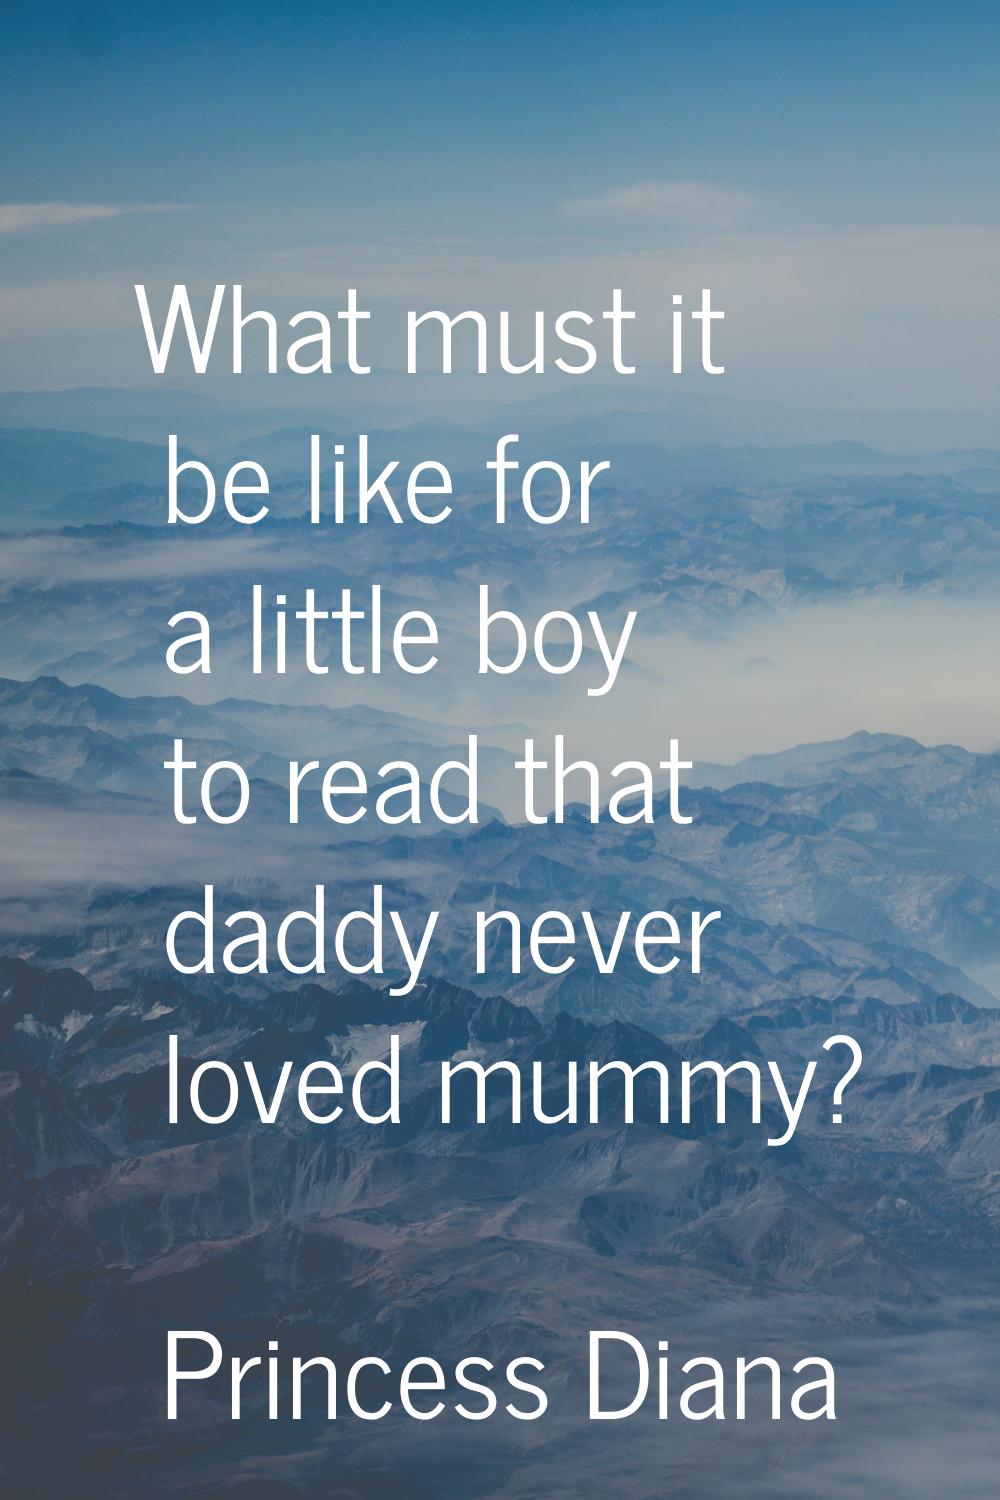 What must it be like for a little boy to read that daddy never loved mummy?